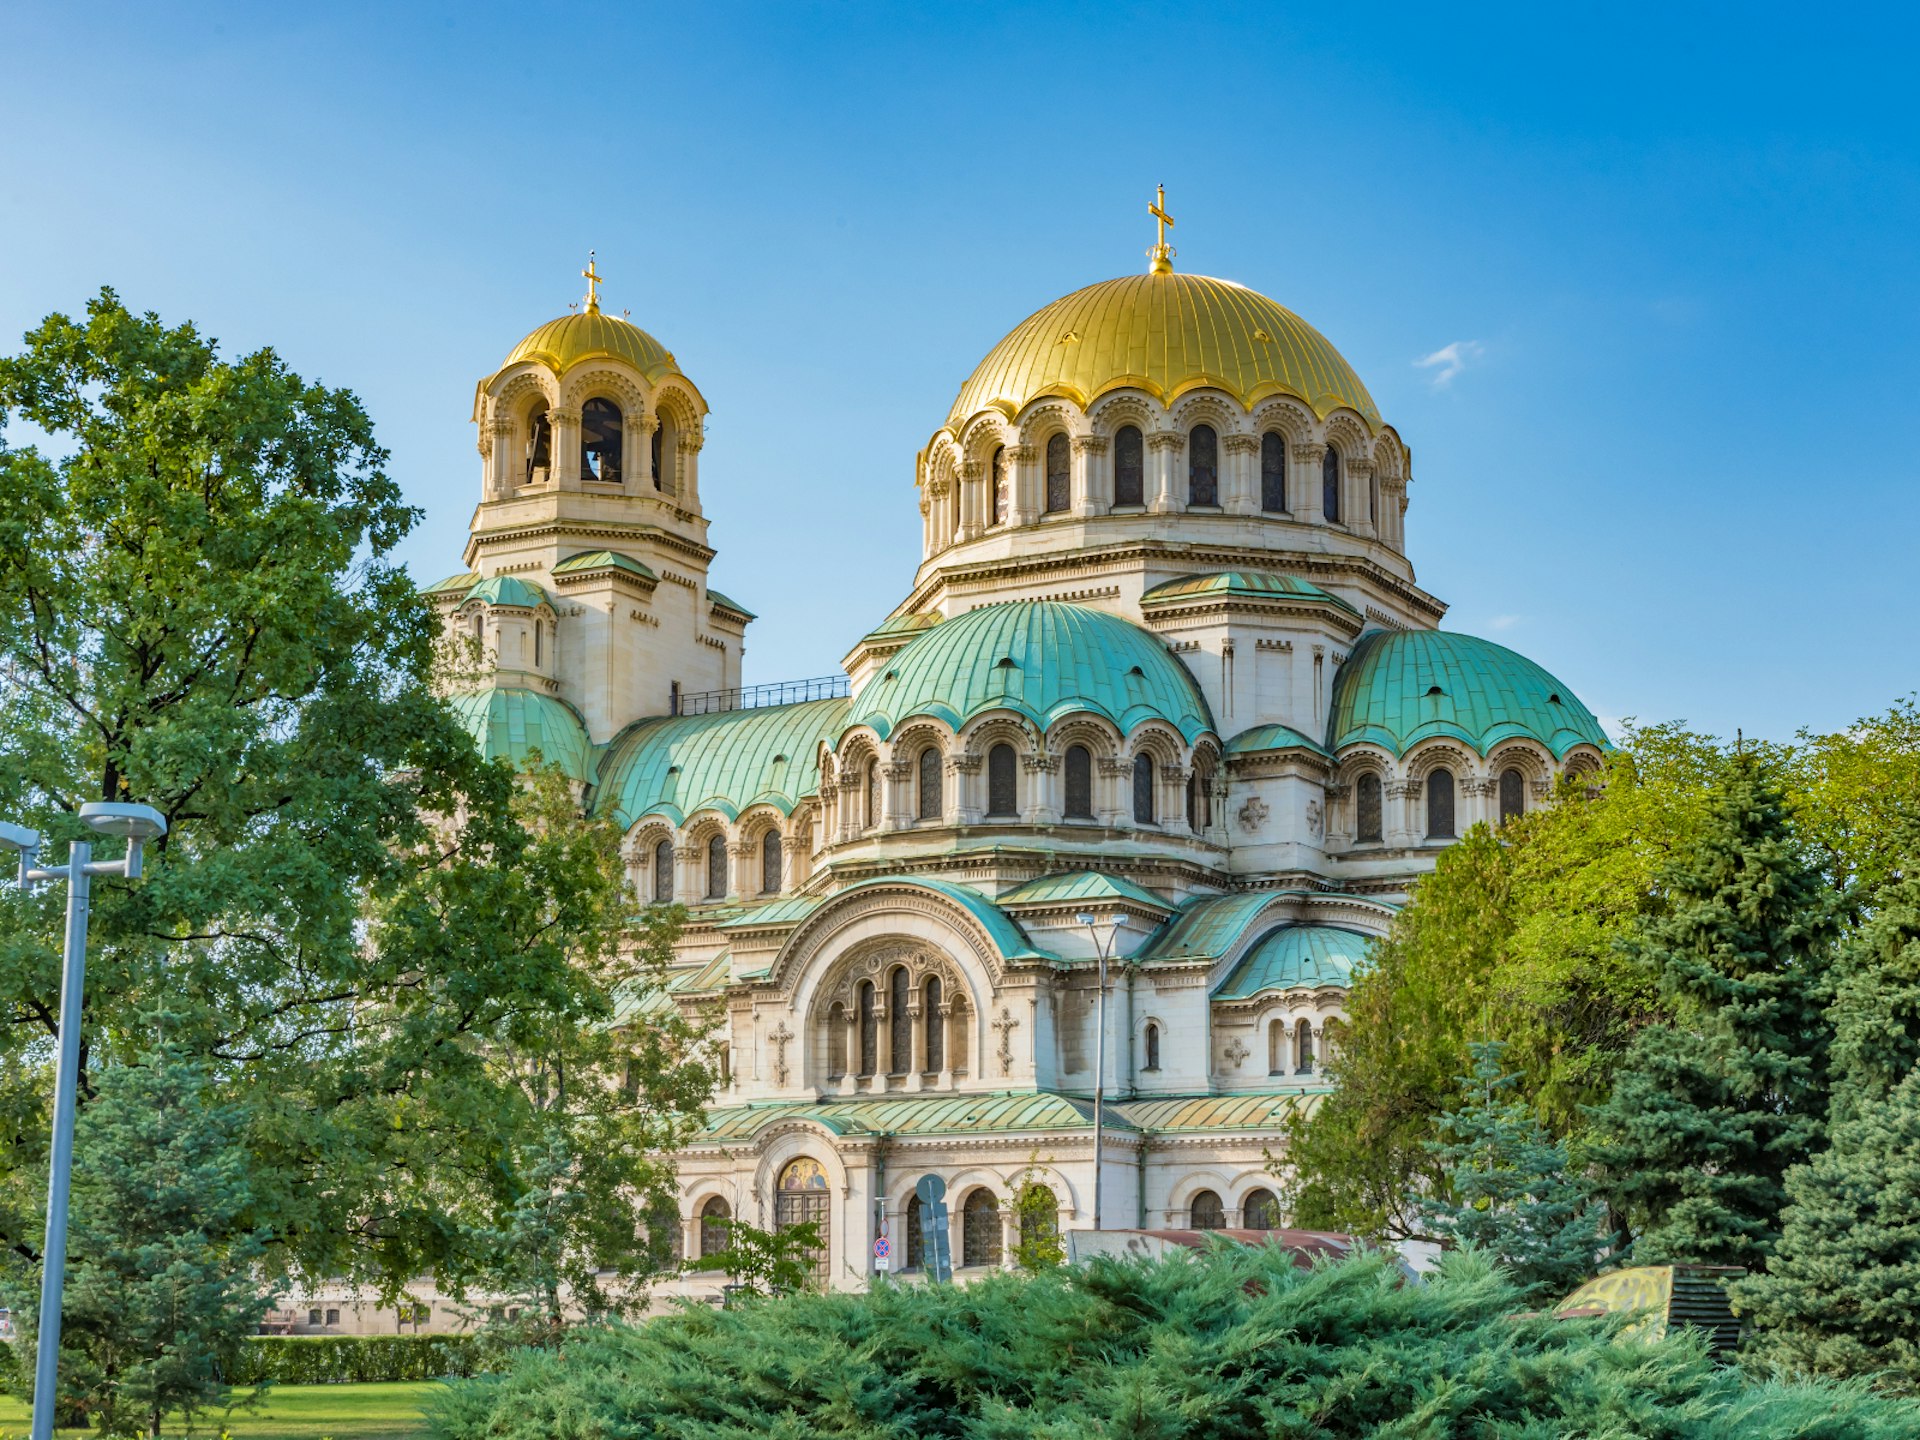 Two gold domes sit above a green roof of this cathedral in Sofia, Bulgaria